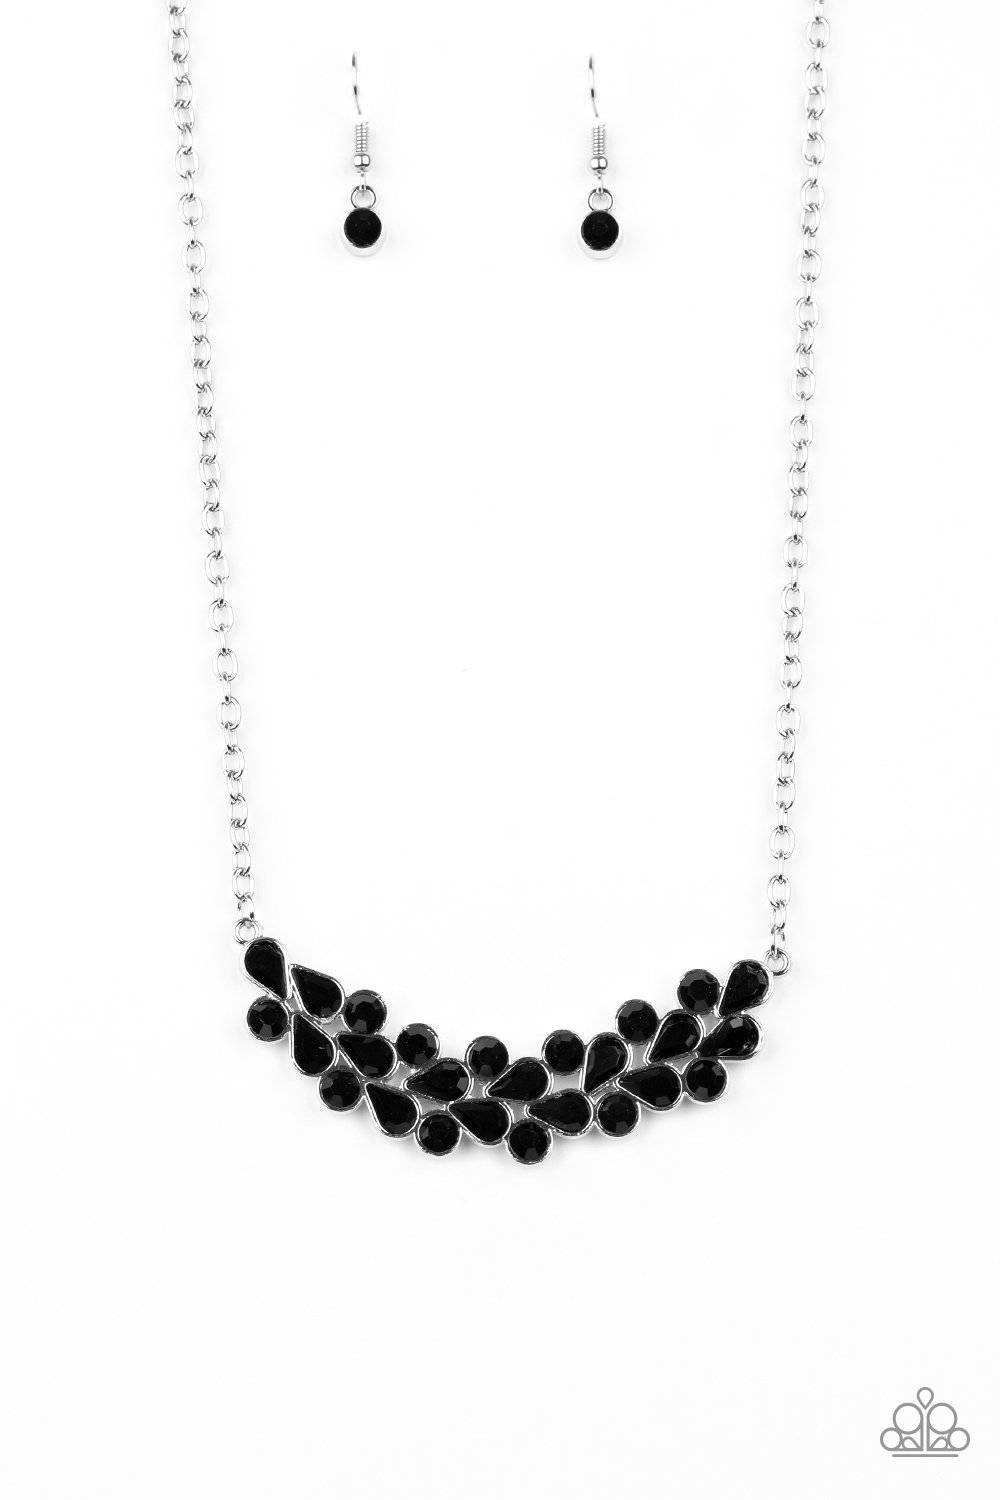 A251 - Special Treatment Necklace by Paparazzi Accessories on Fancy5Fashion.com